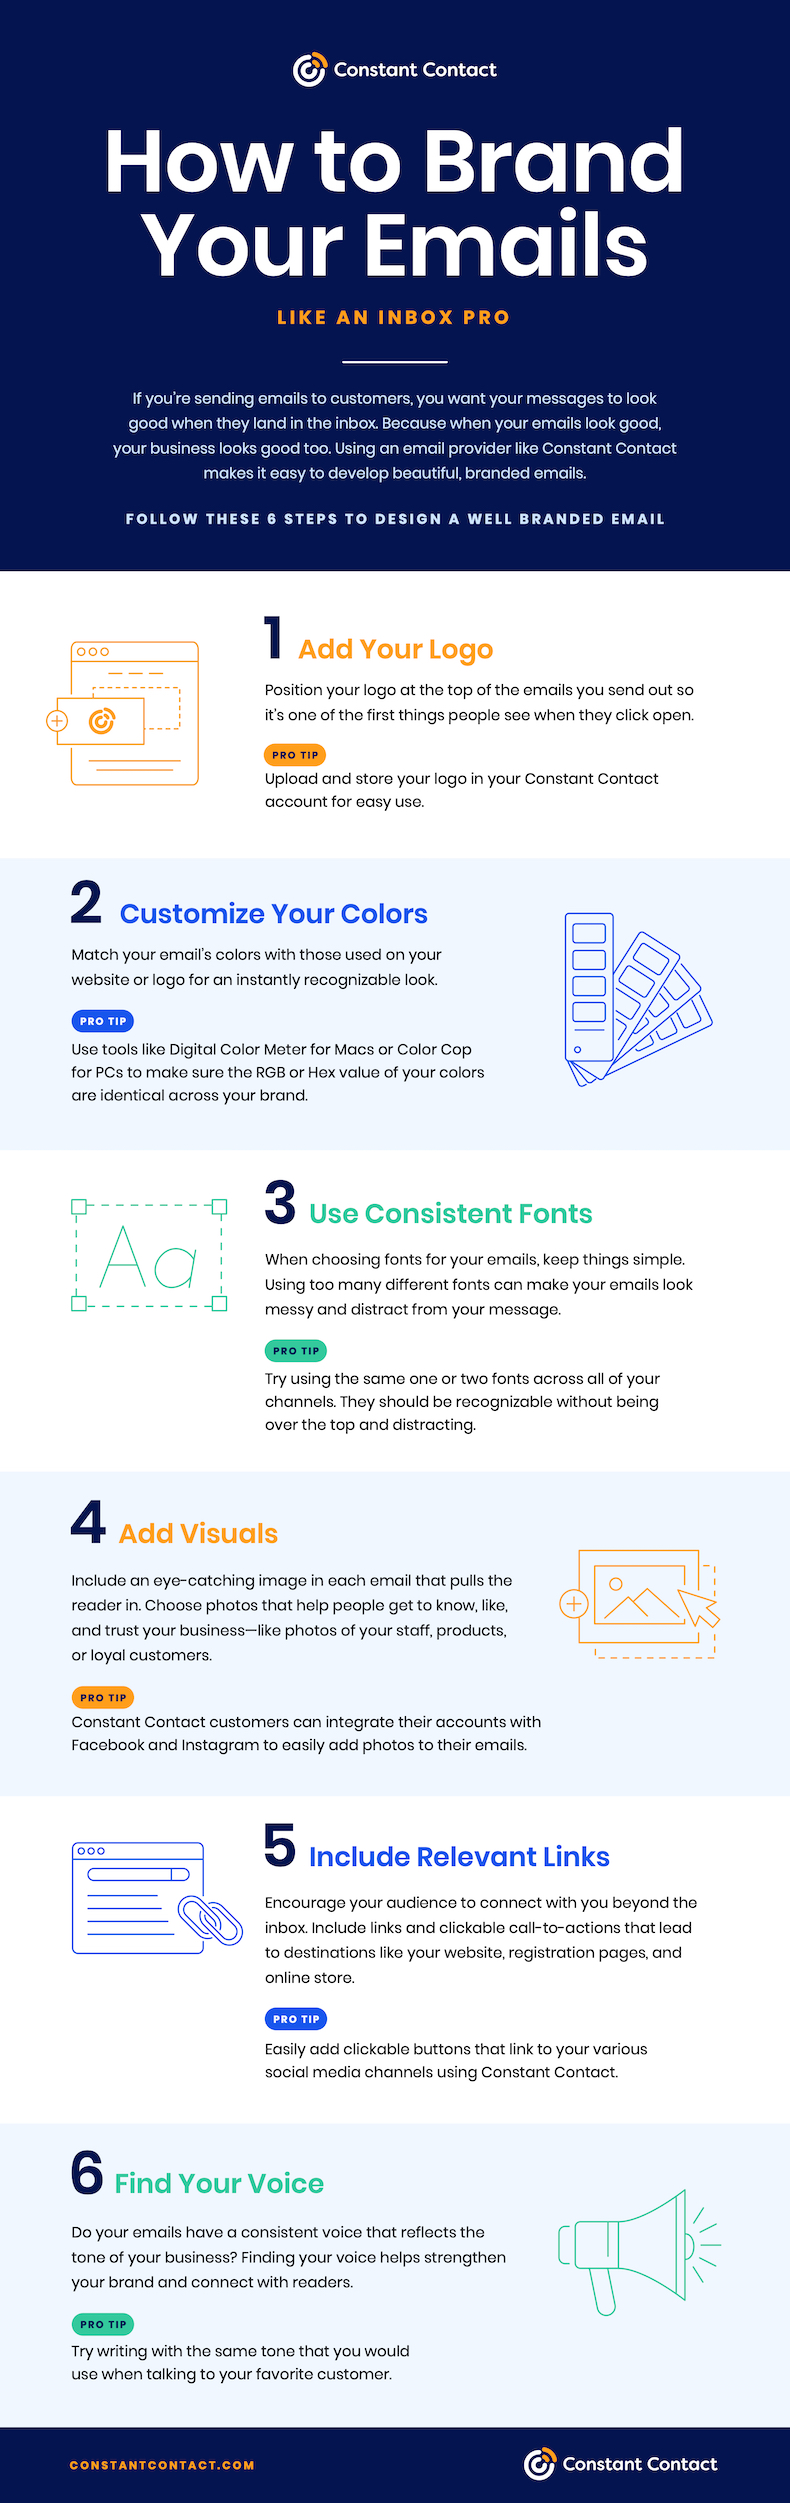 How to Brand Your Emails infographic by Constant Contact